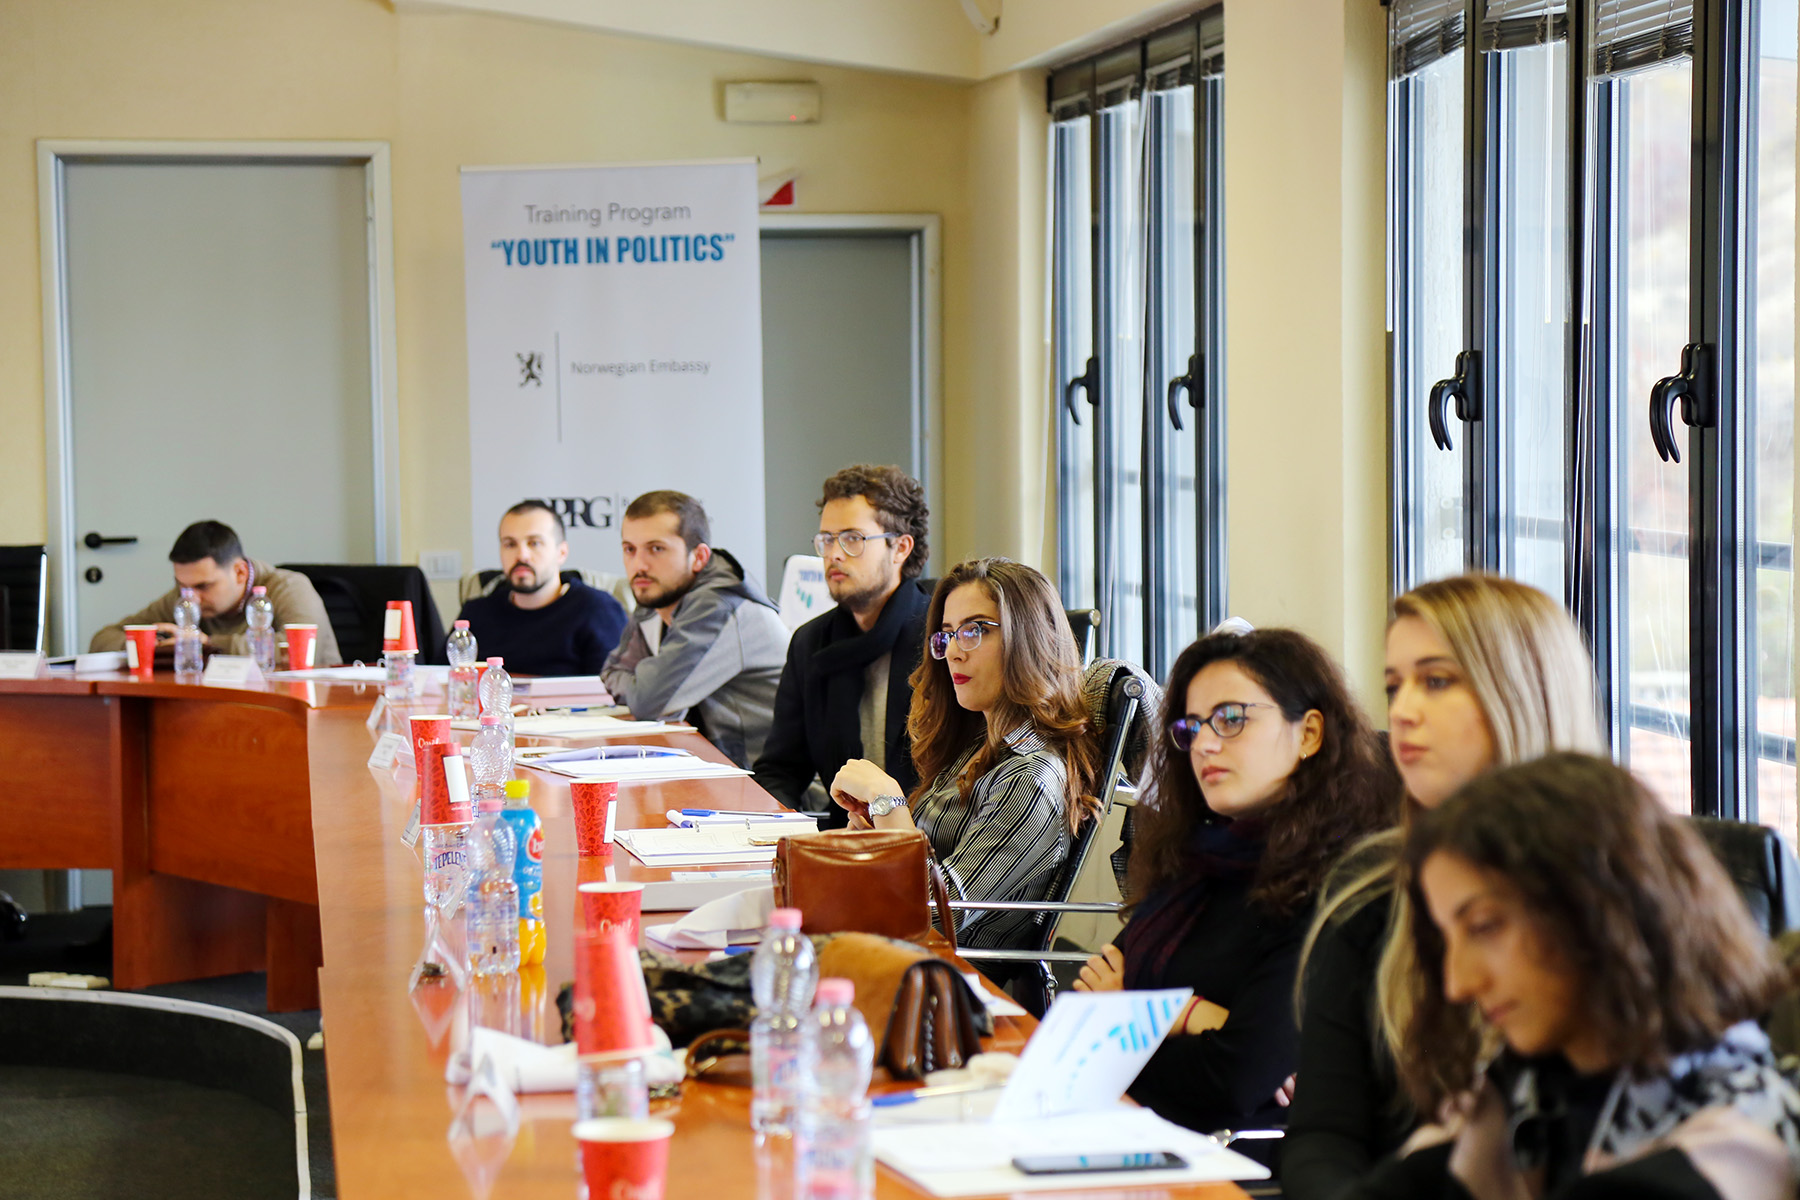 Balkans Group organised the second training for the Youth in Politics